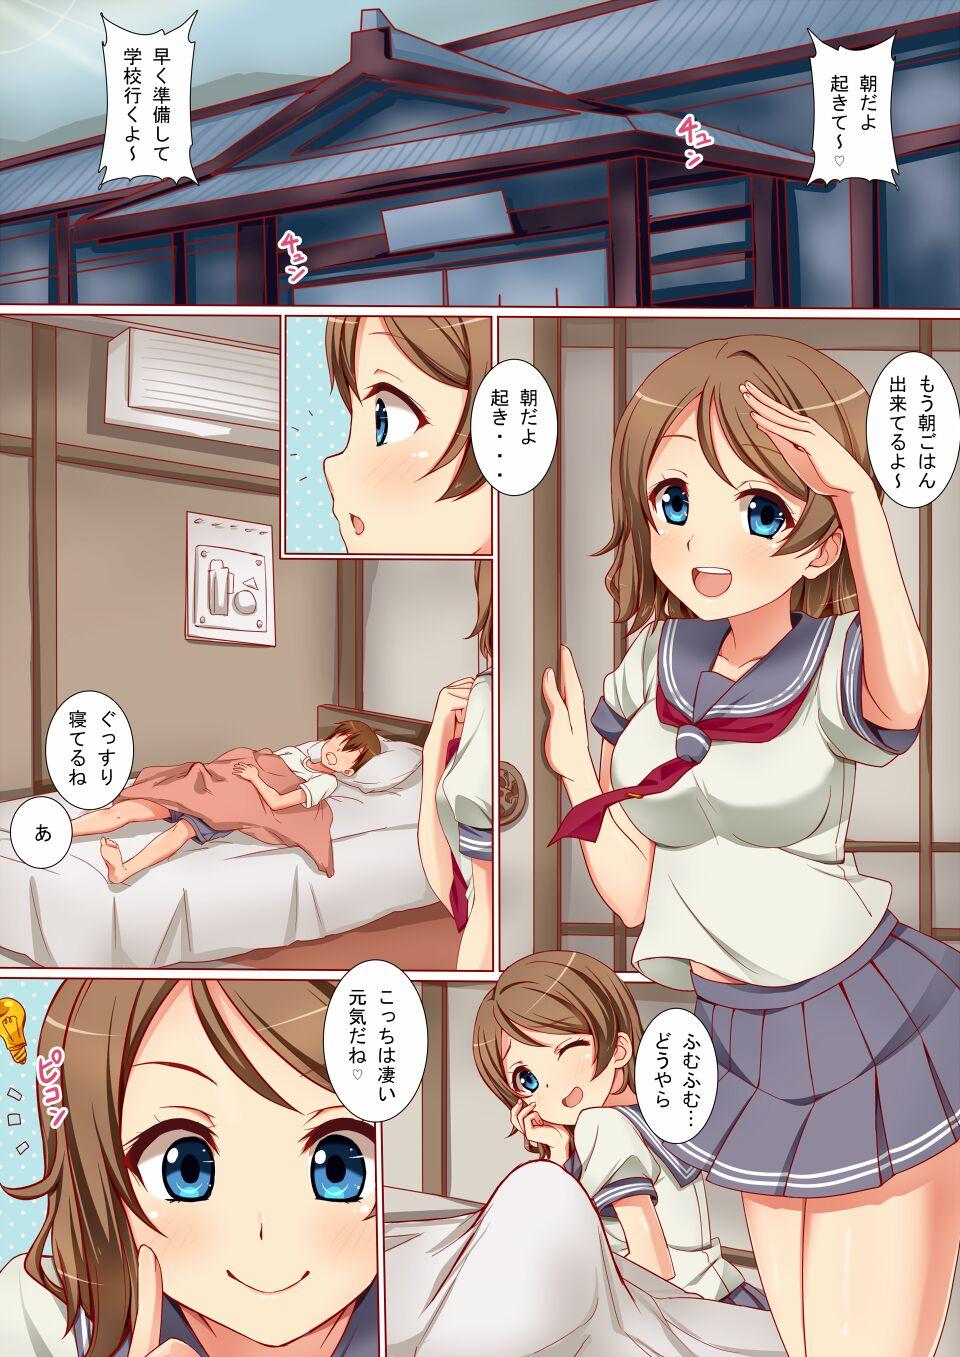 Gloryhole Morning flirting between two people - Love live sunshine Top - Picture 2